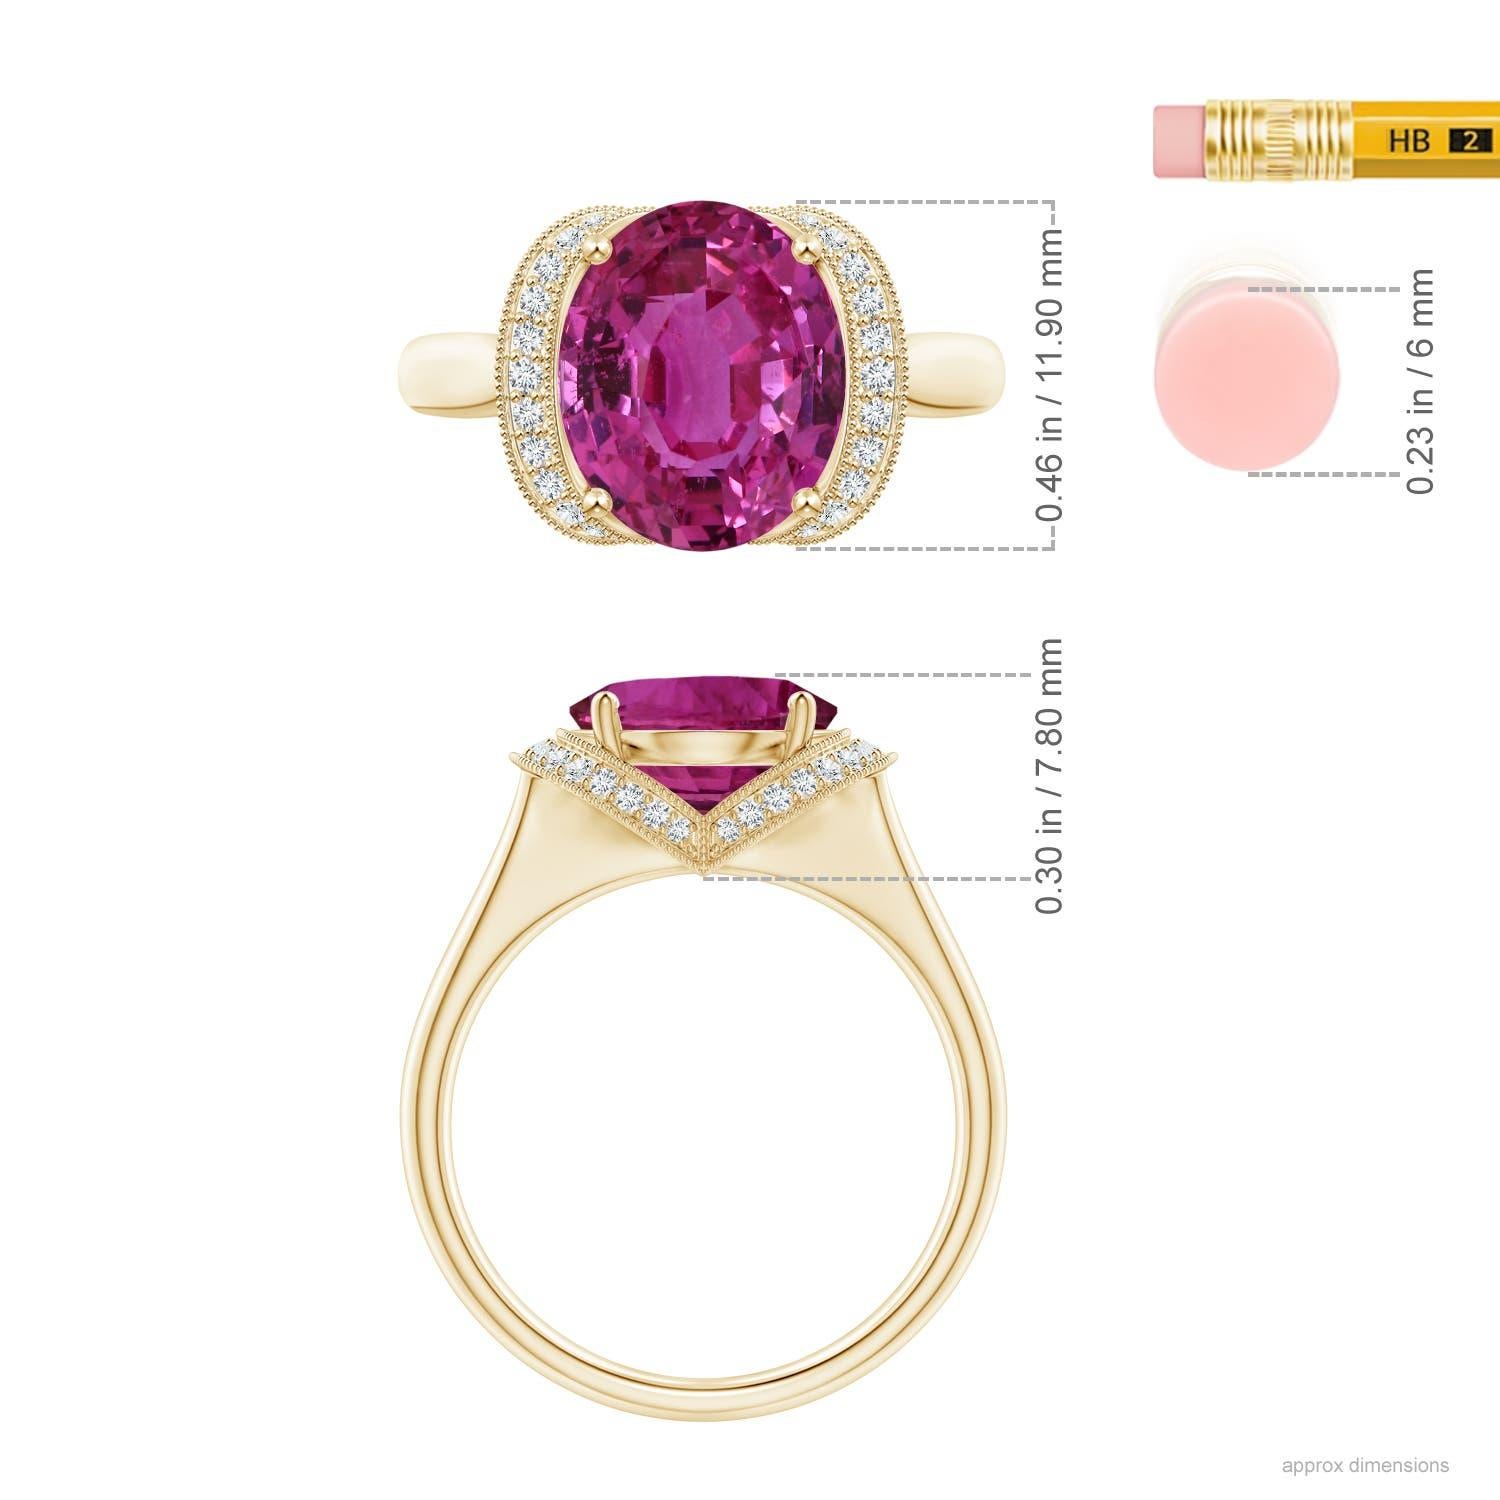 For Sale:  Angara Gia Certified Pink Sapphire Ring in Yellow Gold with Diamond Half Halo 4